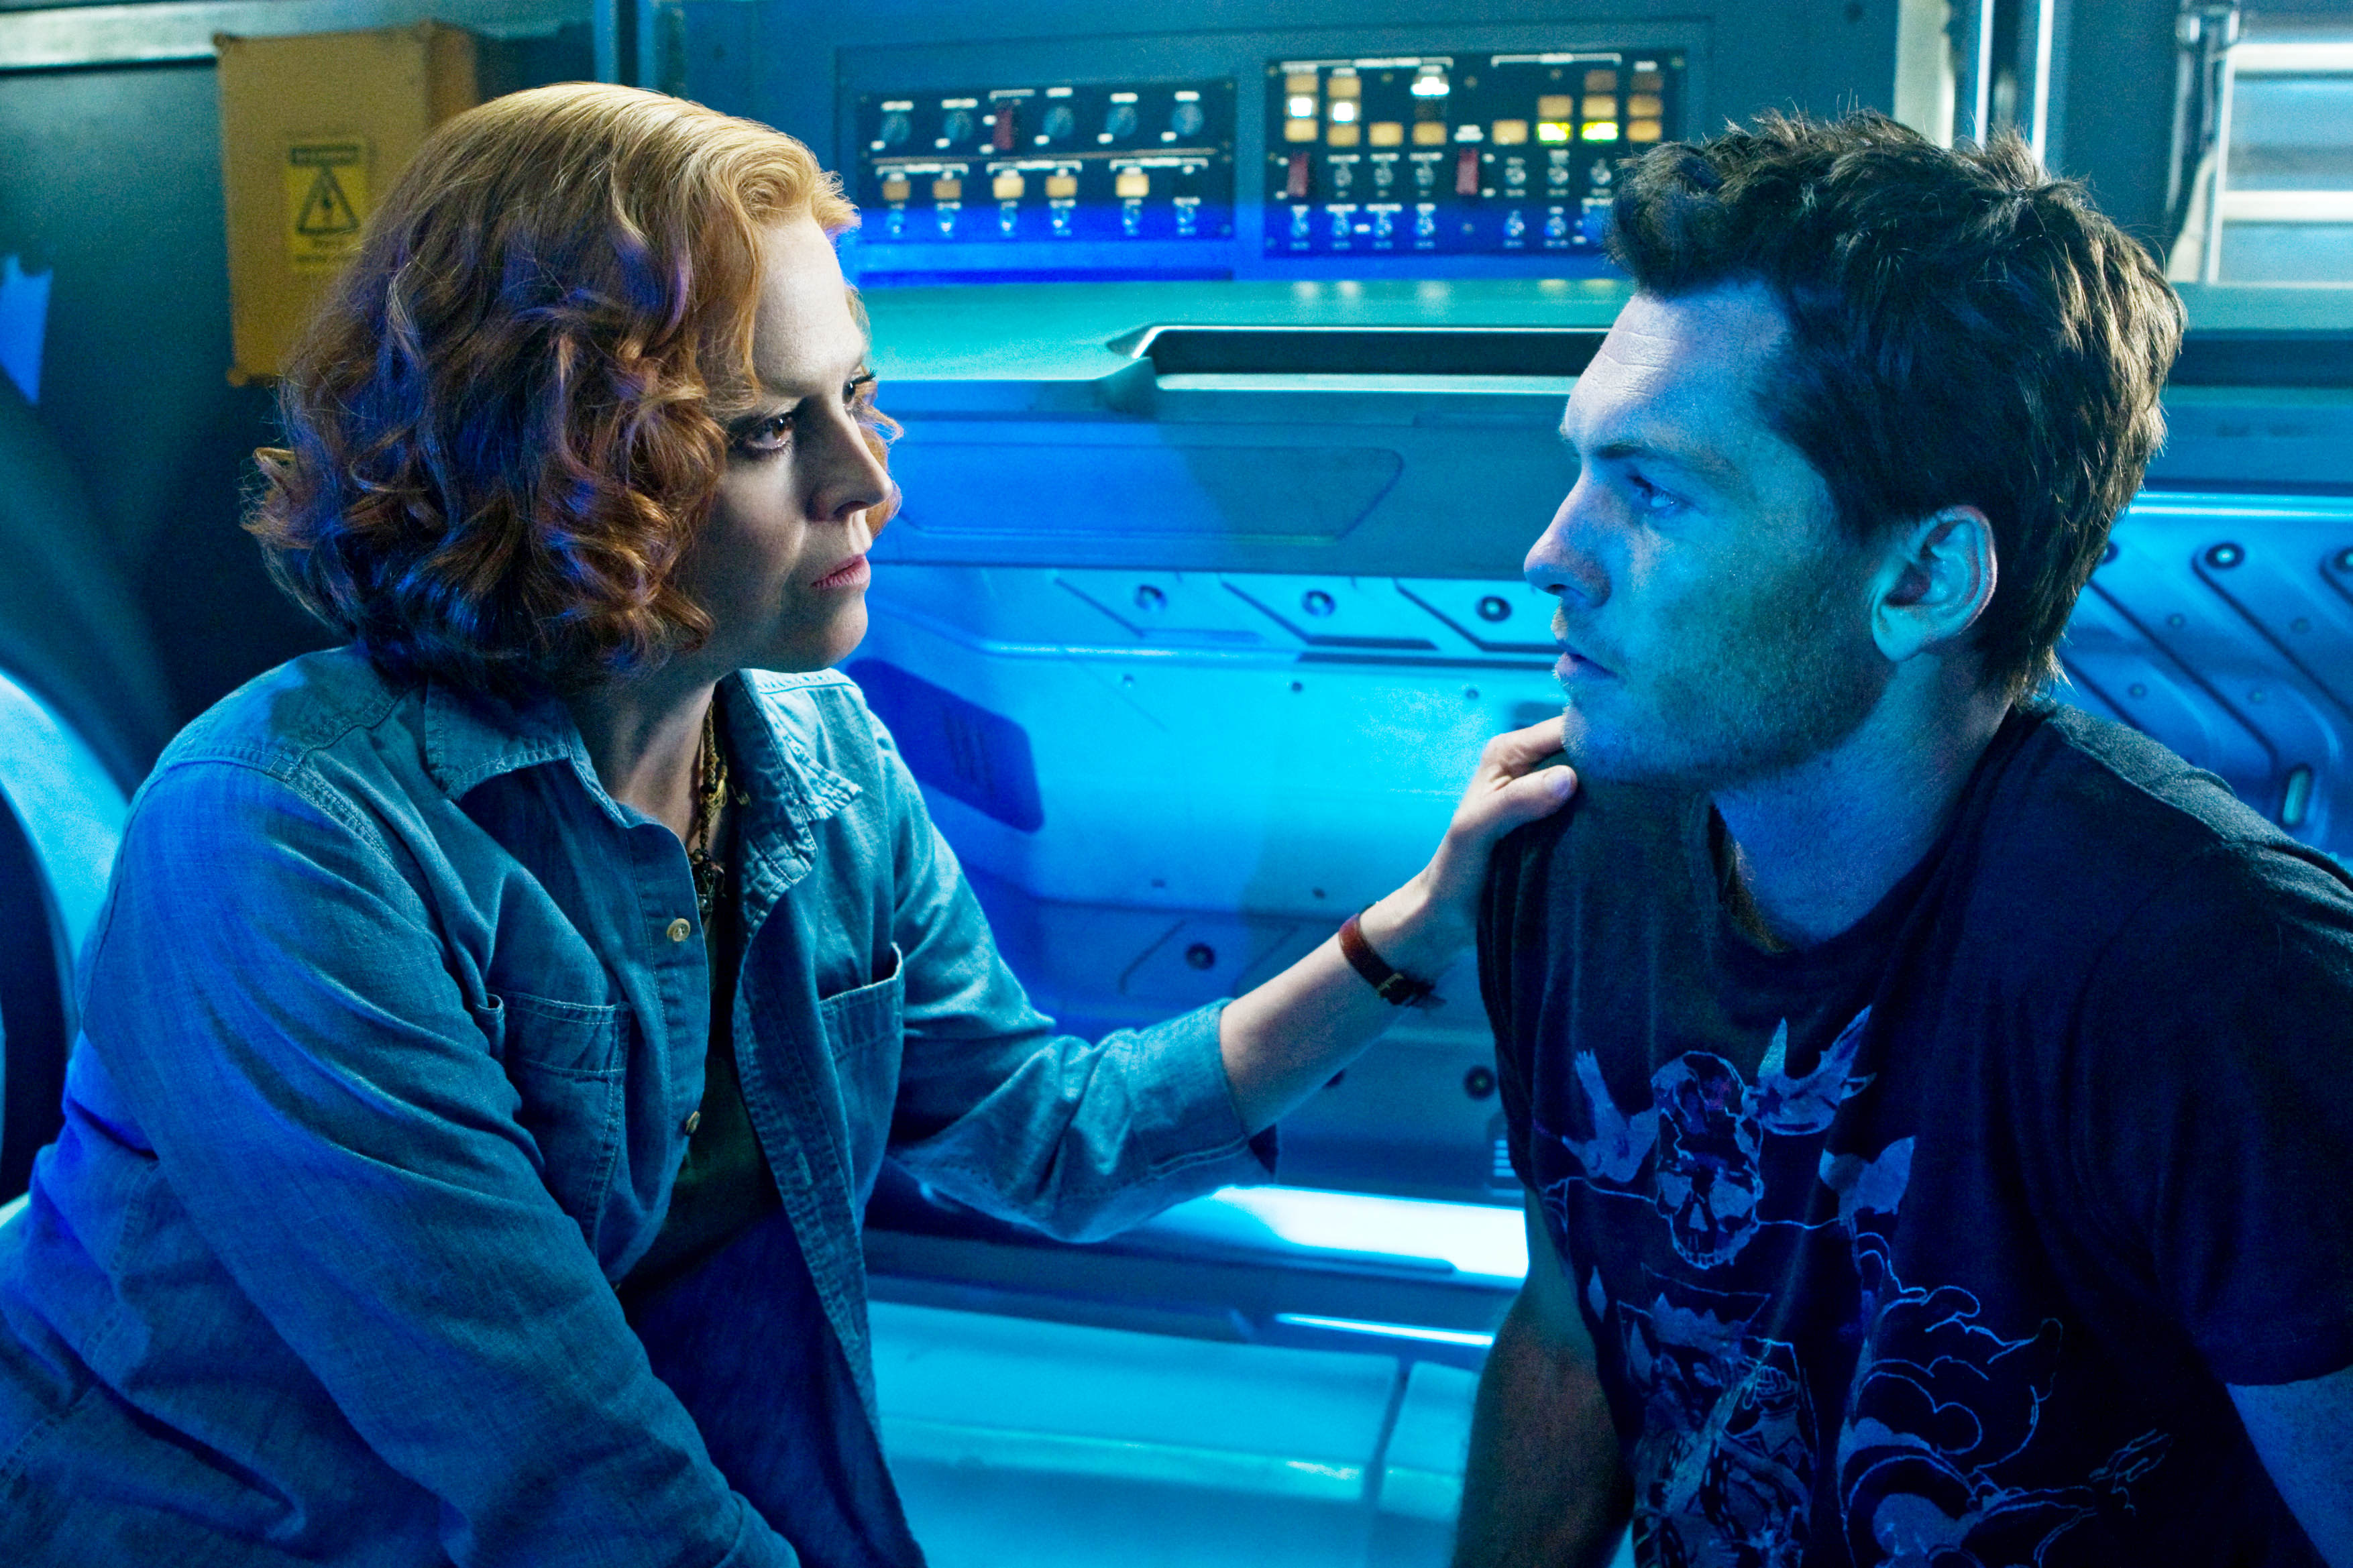 Sigourney Weaver stars as Dr. Grace Augustine and Sam Worthington stars as Jake Sully in The 20th Century Fox's Avatar (2009)